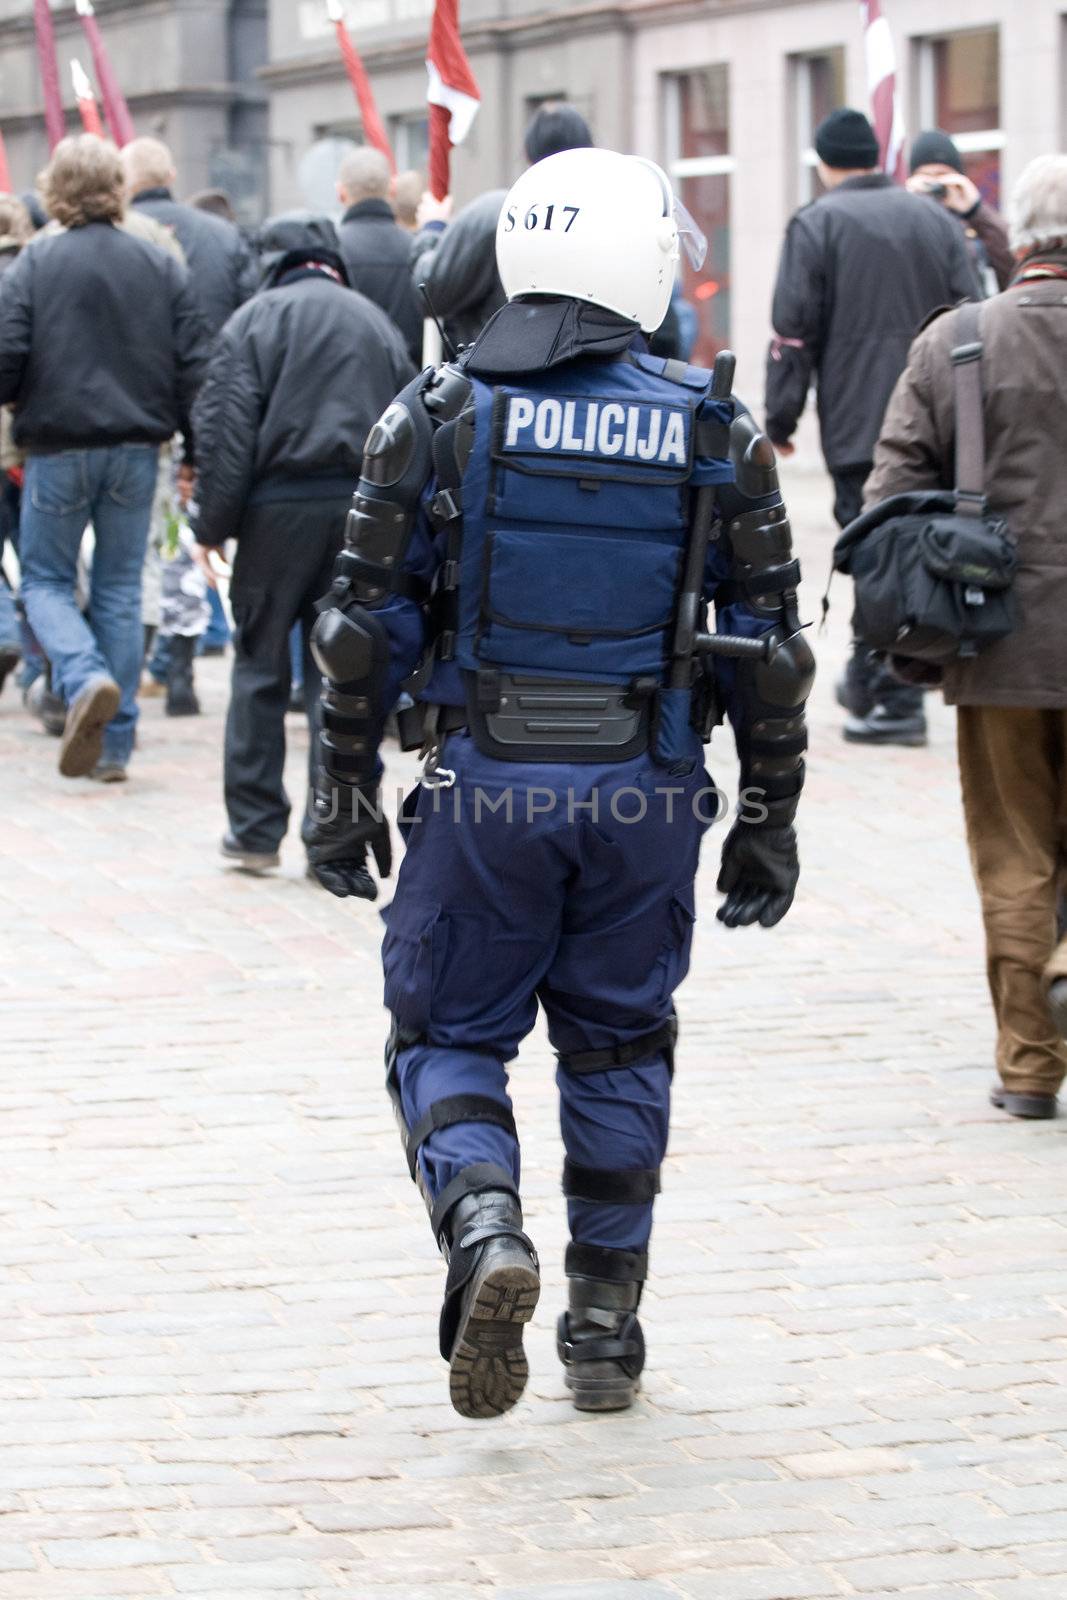 Riga, Latvia, March 16, 2009. Riot police observing Commemoration of the Latvian Waffen SS unit or Legionnaires.The event is always drawing crowds of nationalist supporters and anti-fascist demonstrators. Many Latvians legionnaires were forcibly called uo to join the Latvian SS Legion.